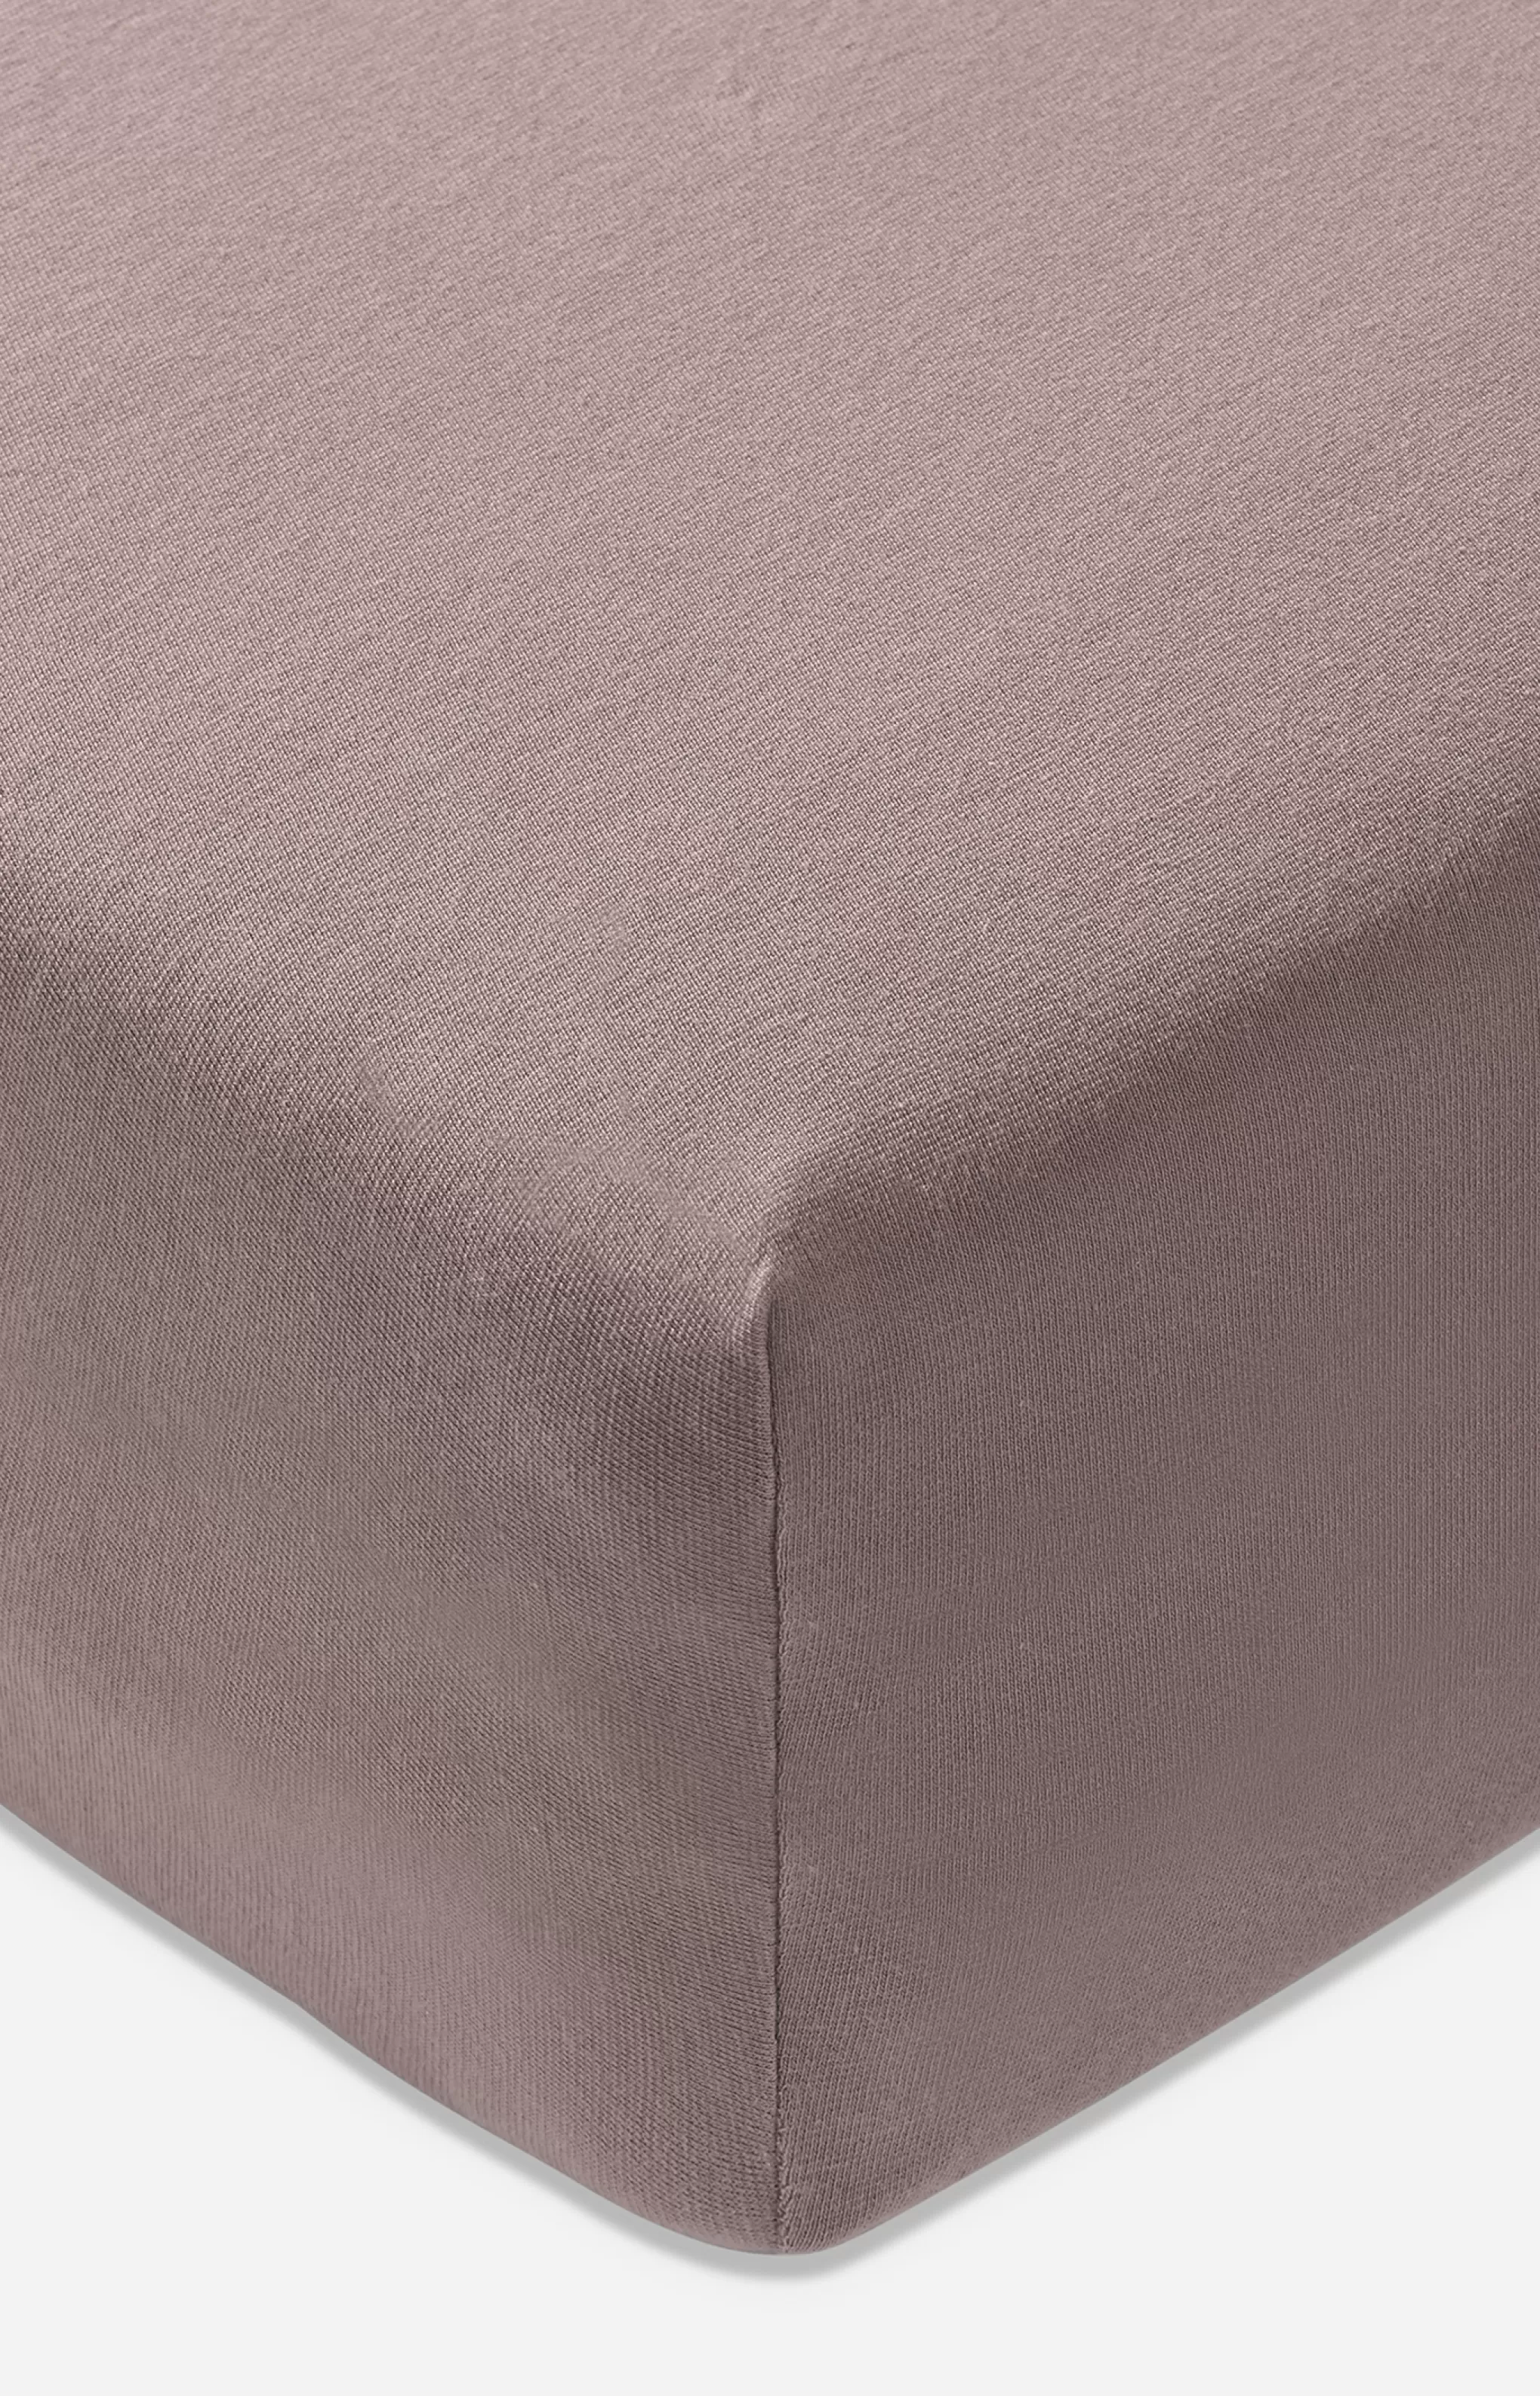 Fitted Sheets | Discover Everything*JOOP Fitted Sheets | Discover Everything ! UNI fitted sheet in